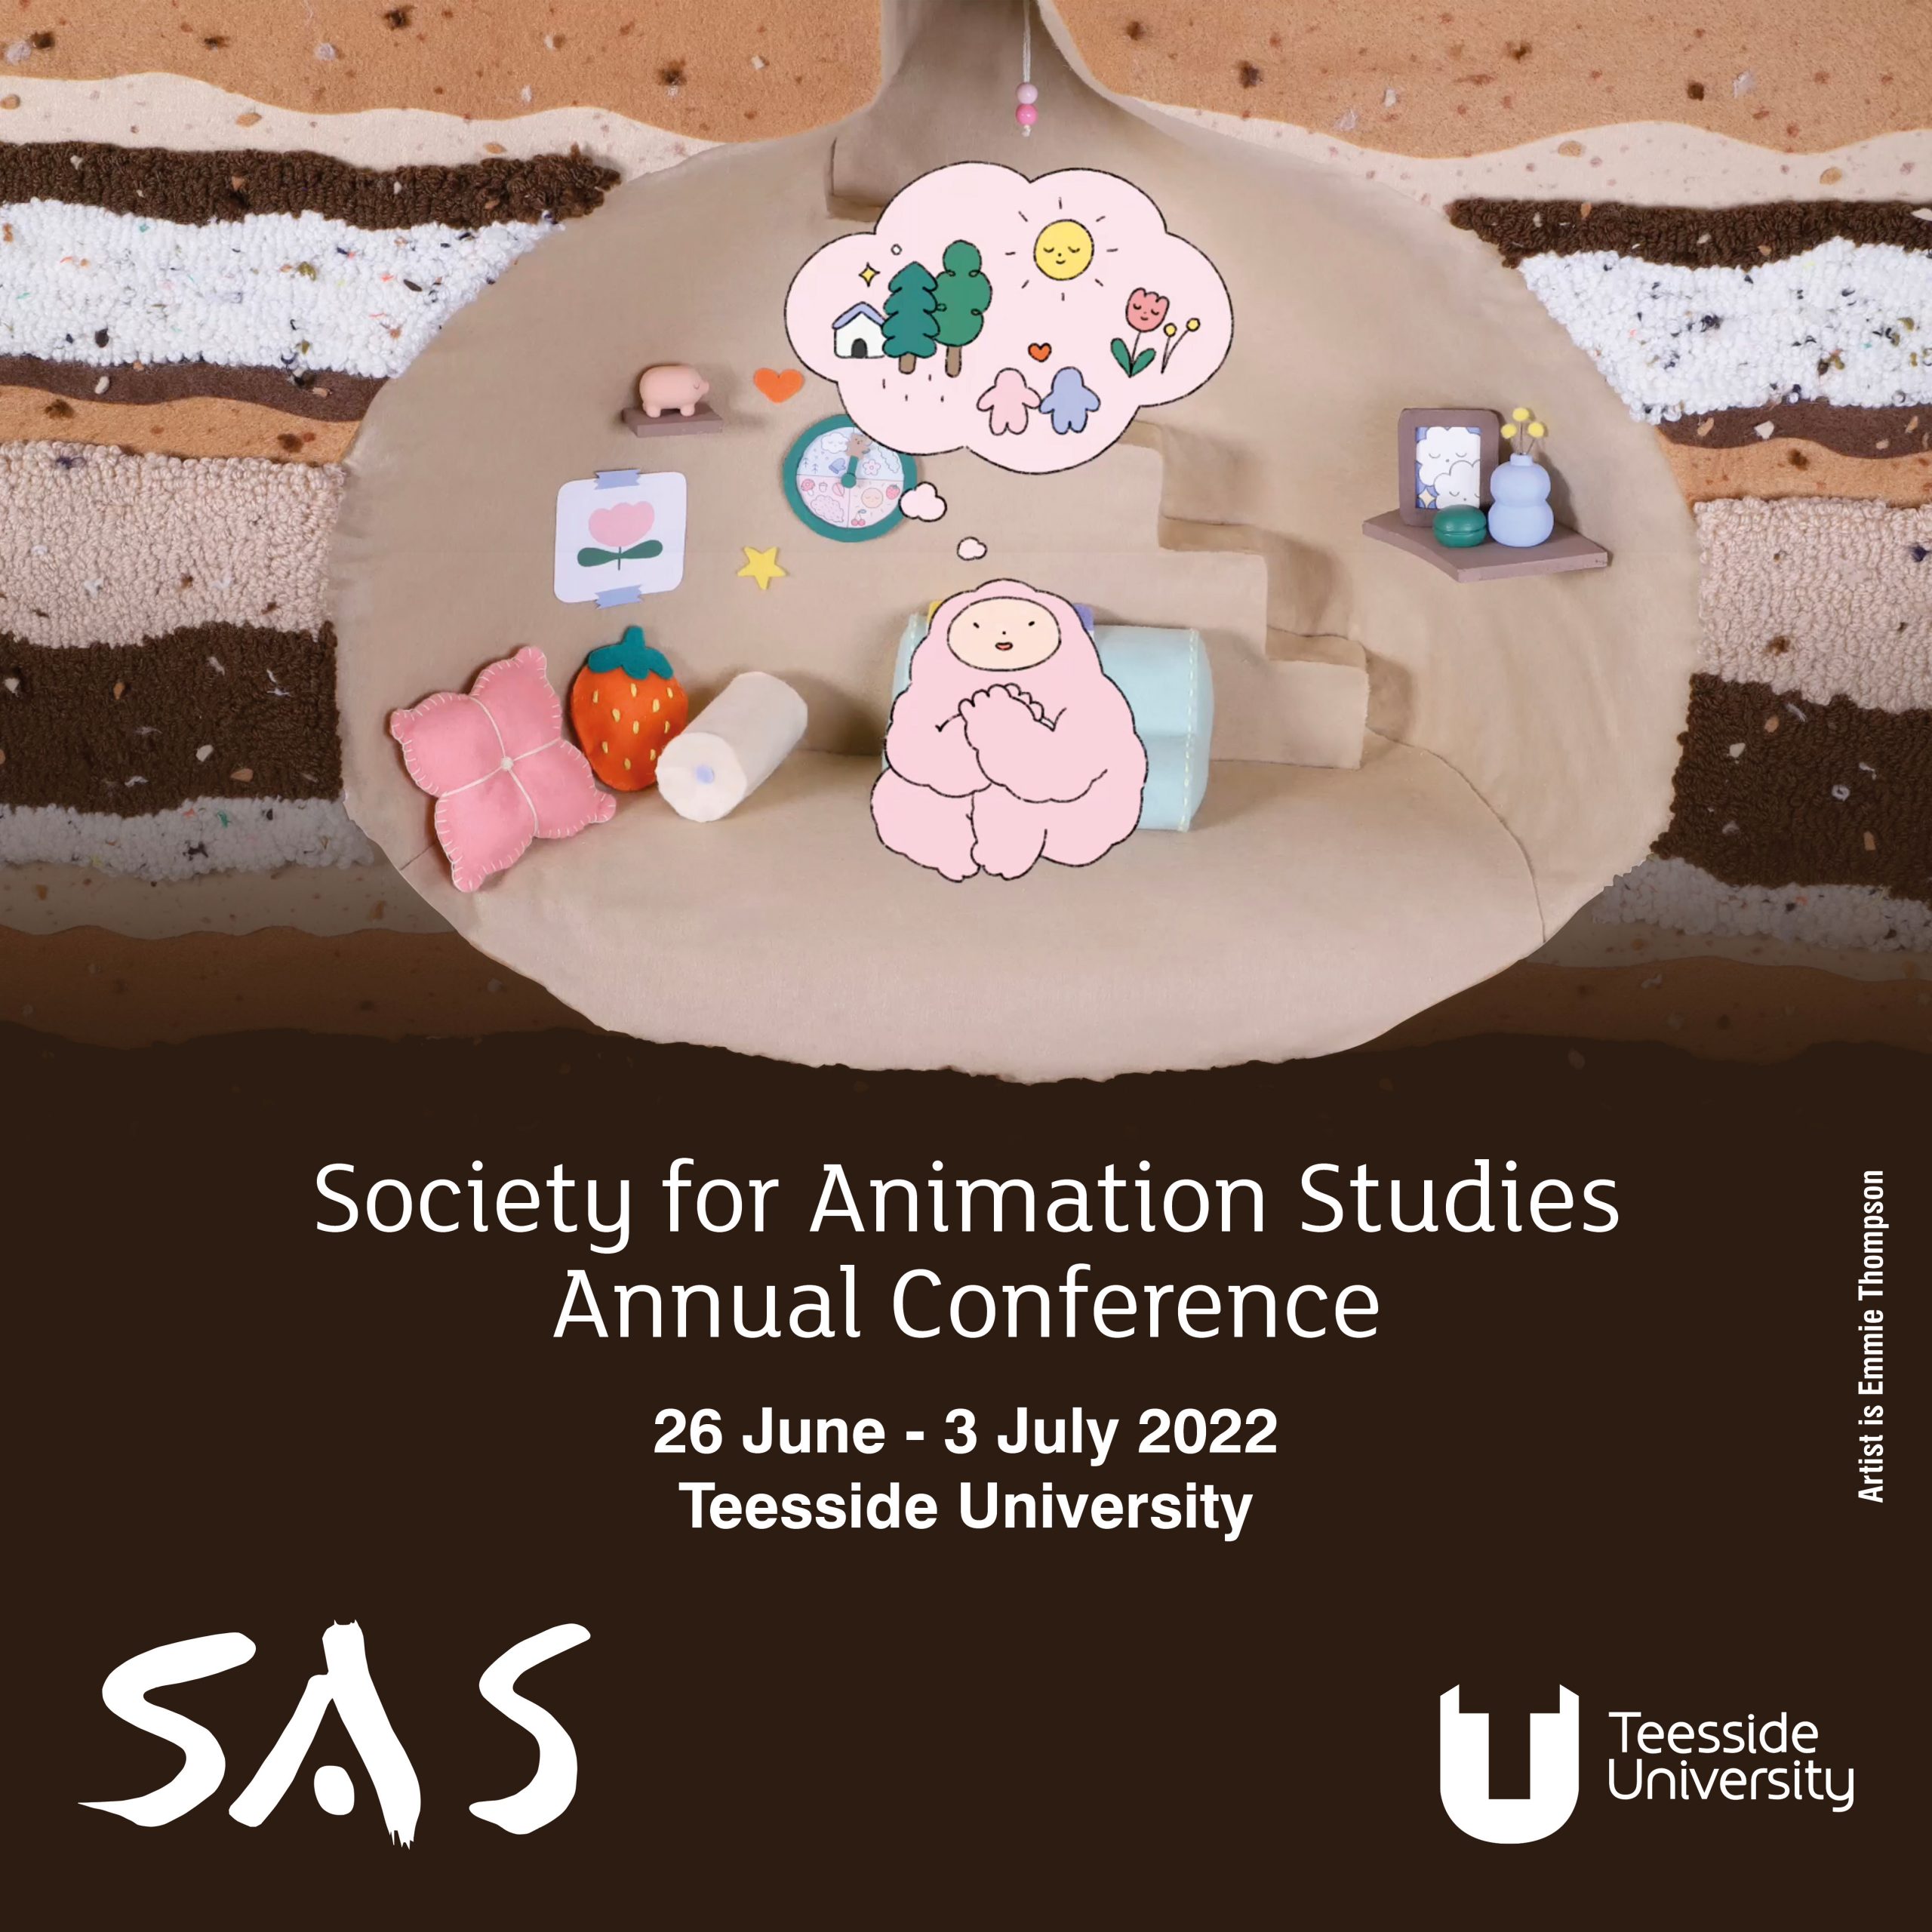 Annual Conference Society for Animation Studies